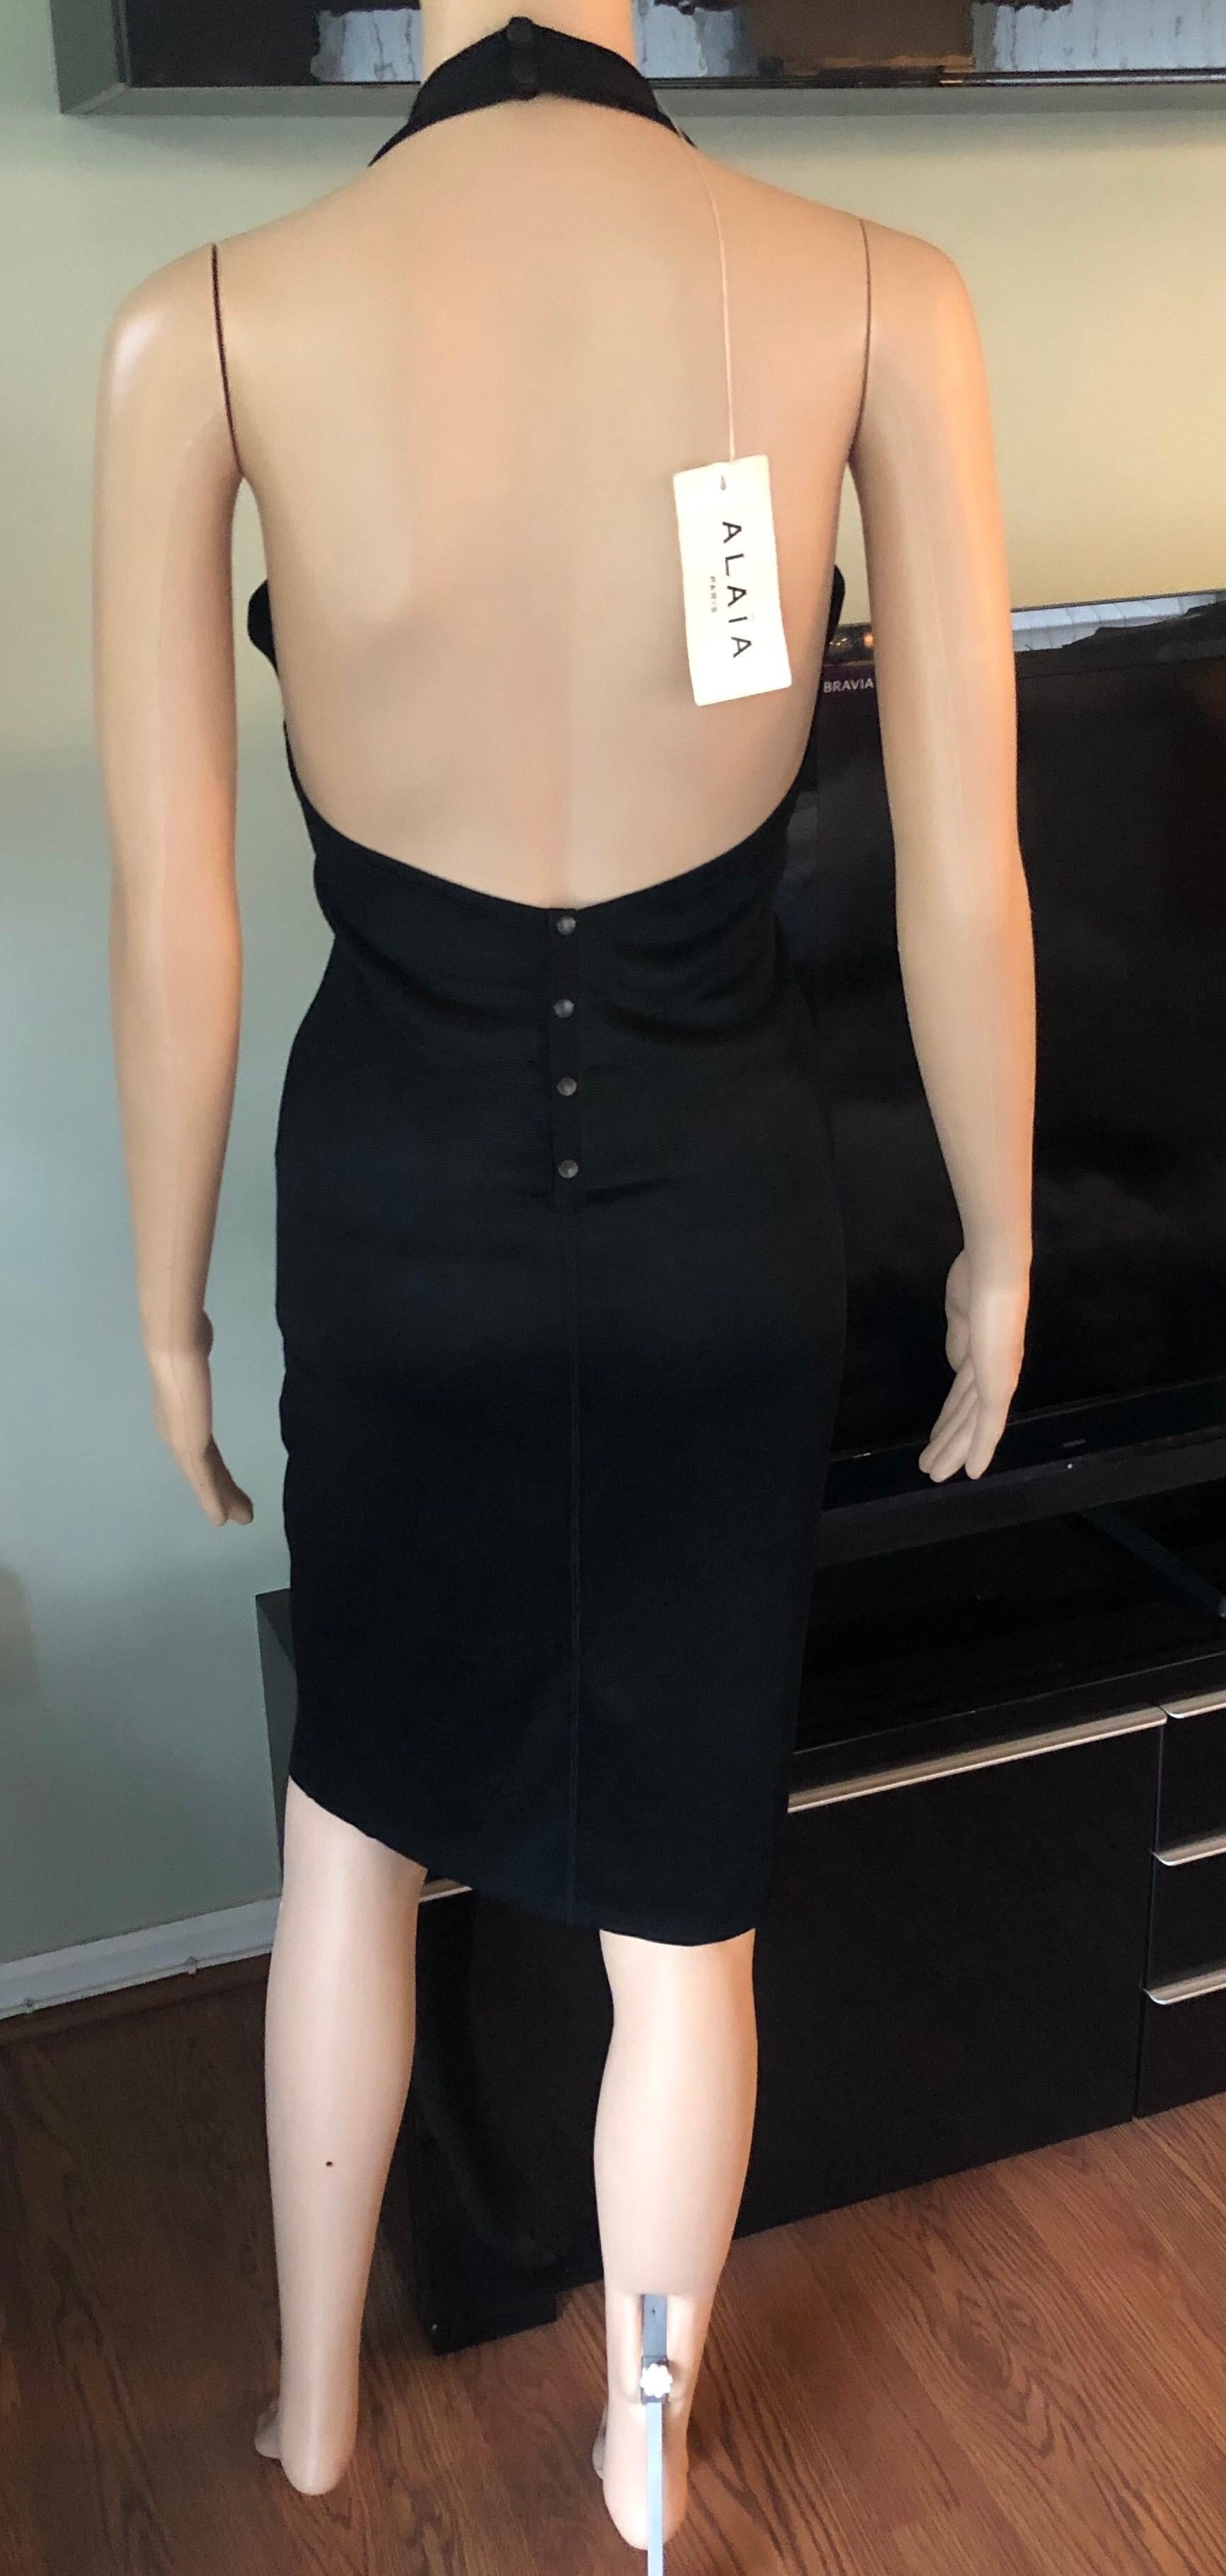 Azzedine Alaia Vintage Bodycon Halter Backless Black Dress Size L

Alaïa fitted halter black dress with scoop neck, open back and snap closures at nape and center back.
